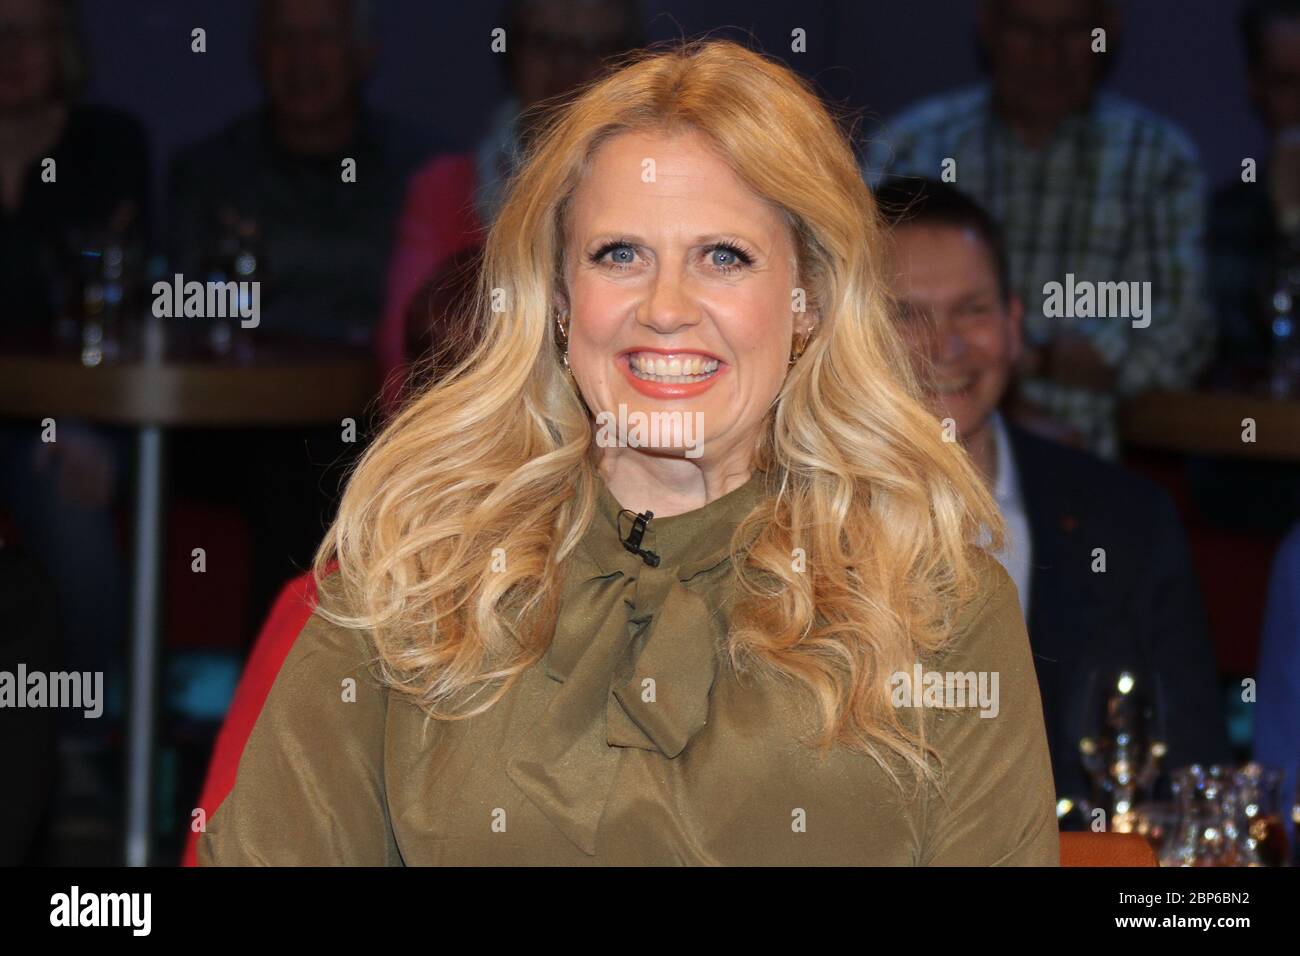 Barbara Schoeneberger,NDR talk show,10.05.2019,Hamburg/SPERRFRIST 10.05.2019 BIS TO OF THE OUT 23:59!!! Foto Stock